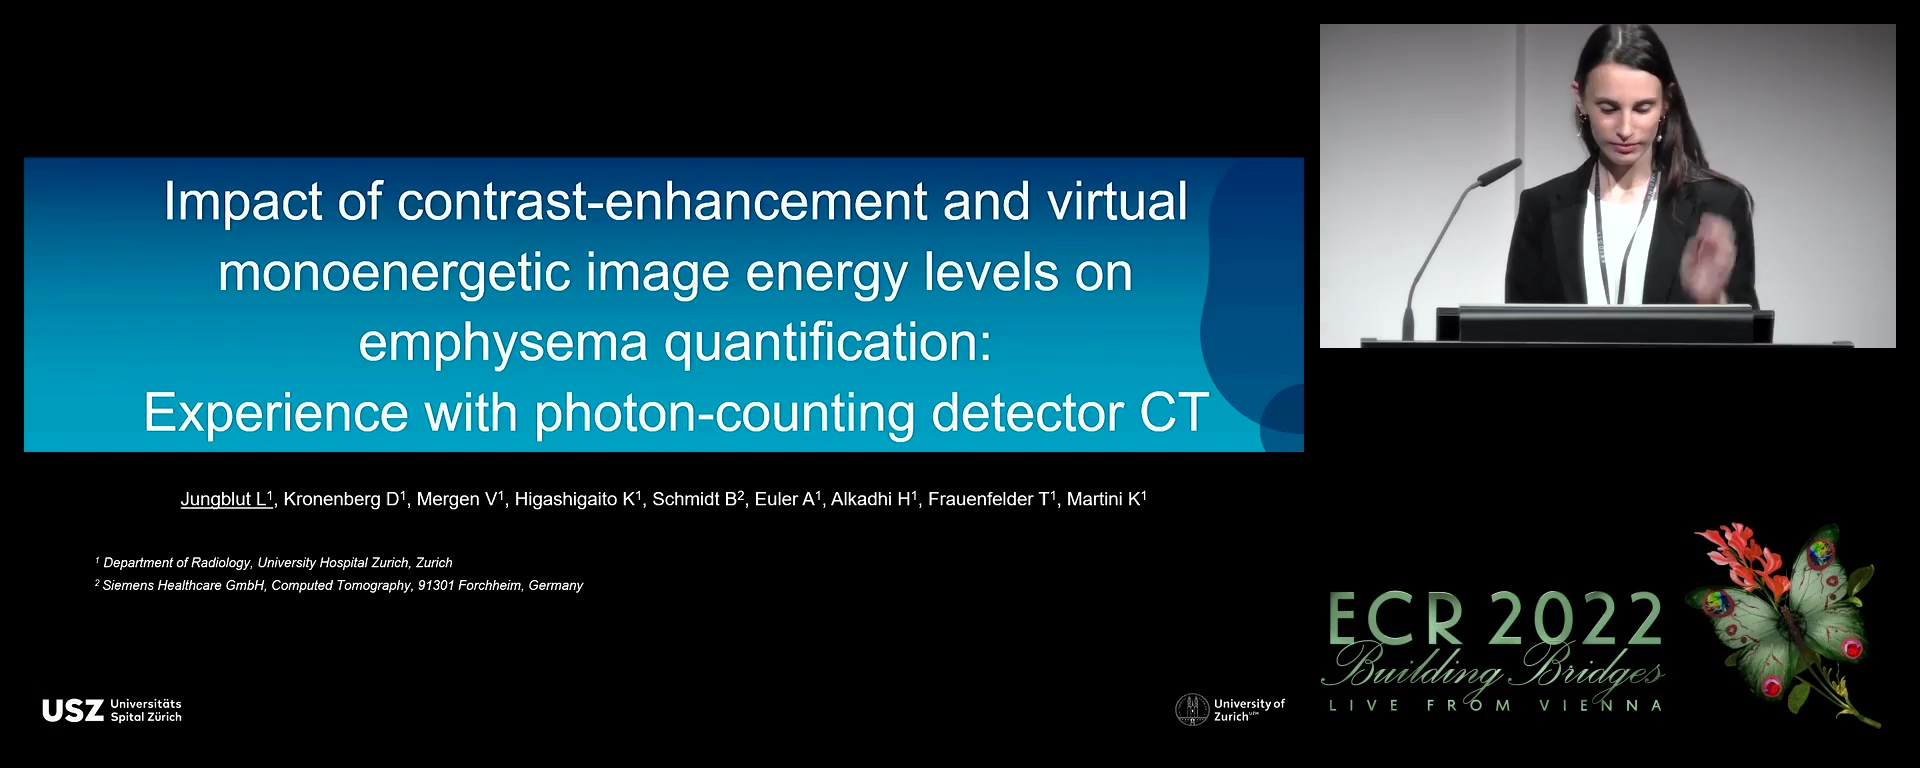 Impact of contrast-enhancement and virtual monoenergetic image energy levels on emphysema quantification: experience with photon-counting detector CT - Lisa Jungblut, Zürich / CH